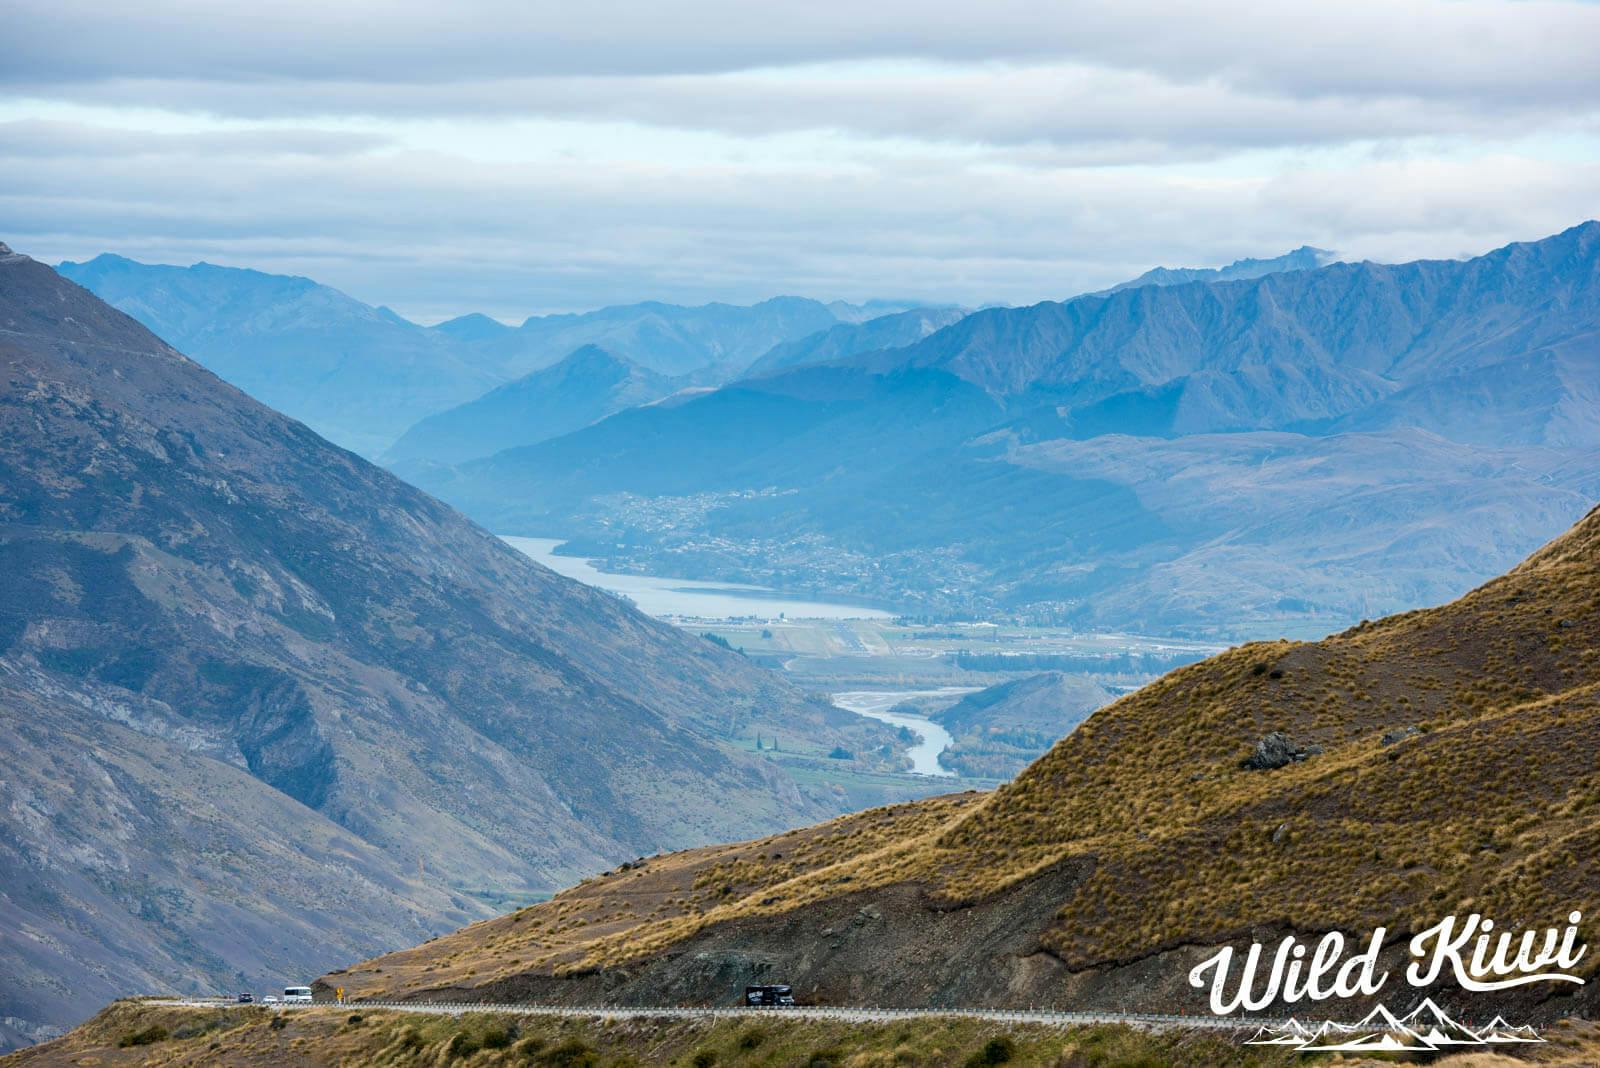 Climb to see the best views in New Zealand - Tours and treks to make the long flight worthwhile